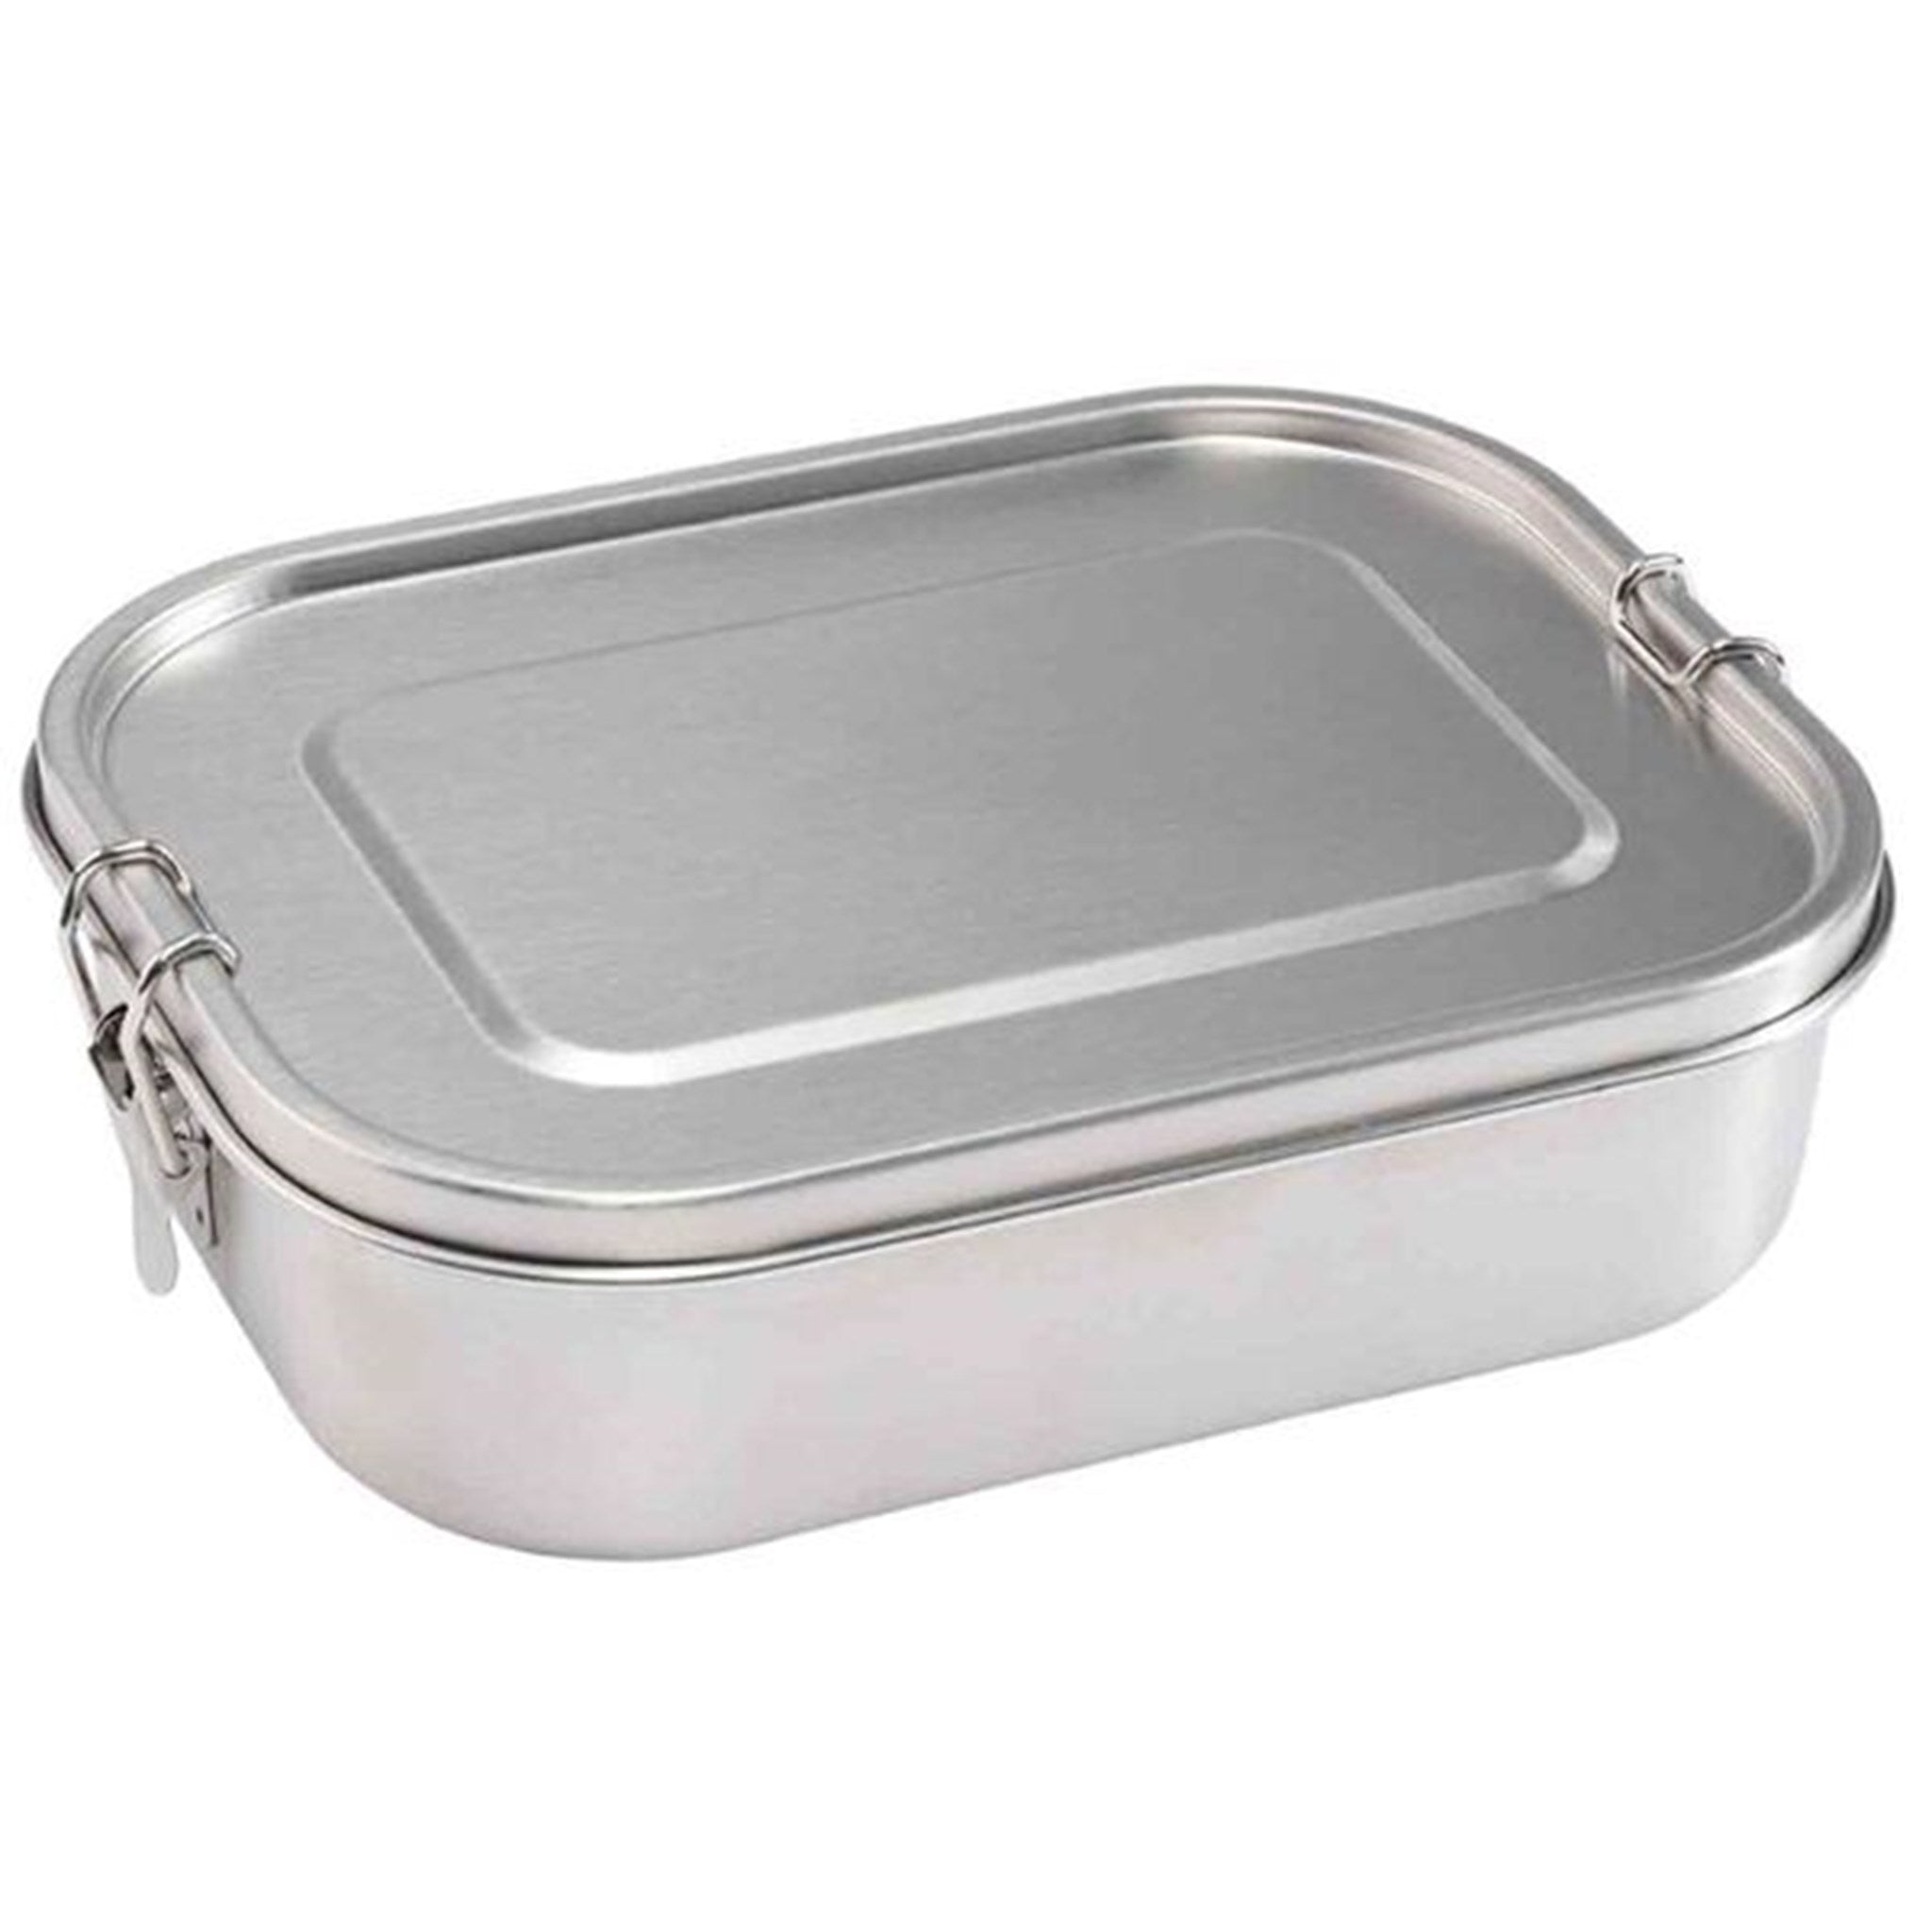 Haps Nordic Lunch Box Large Steel